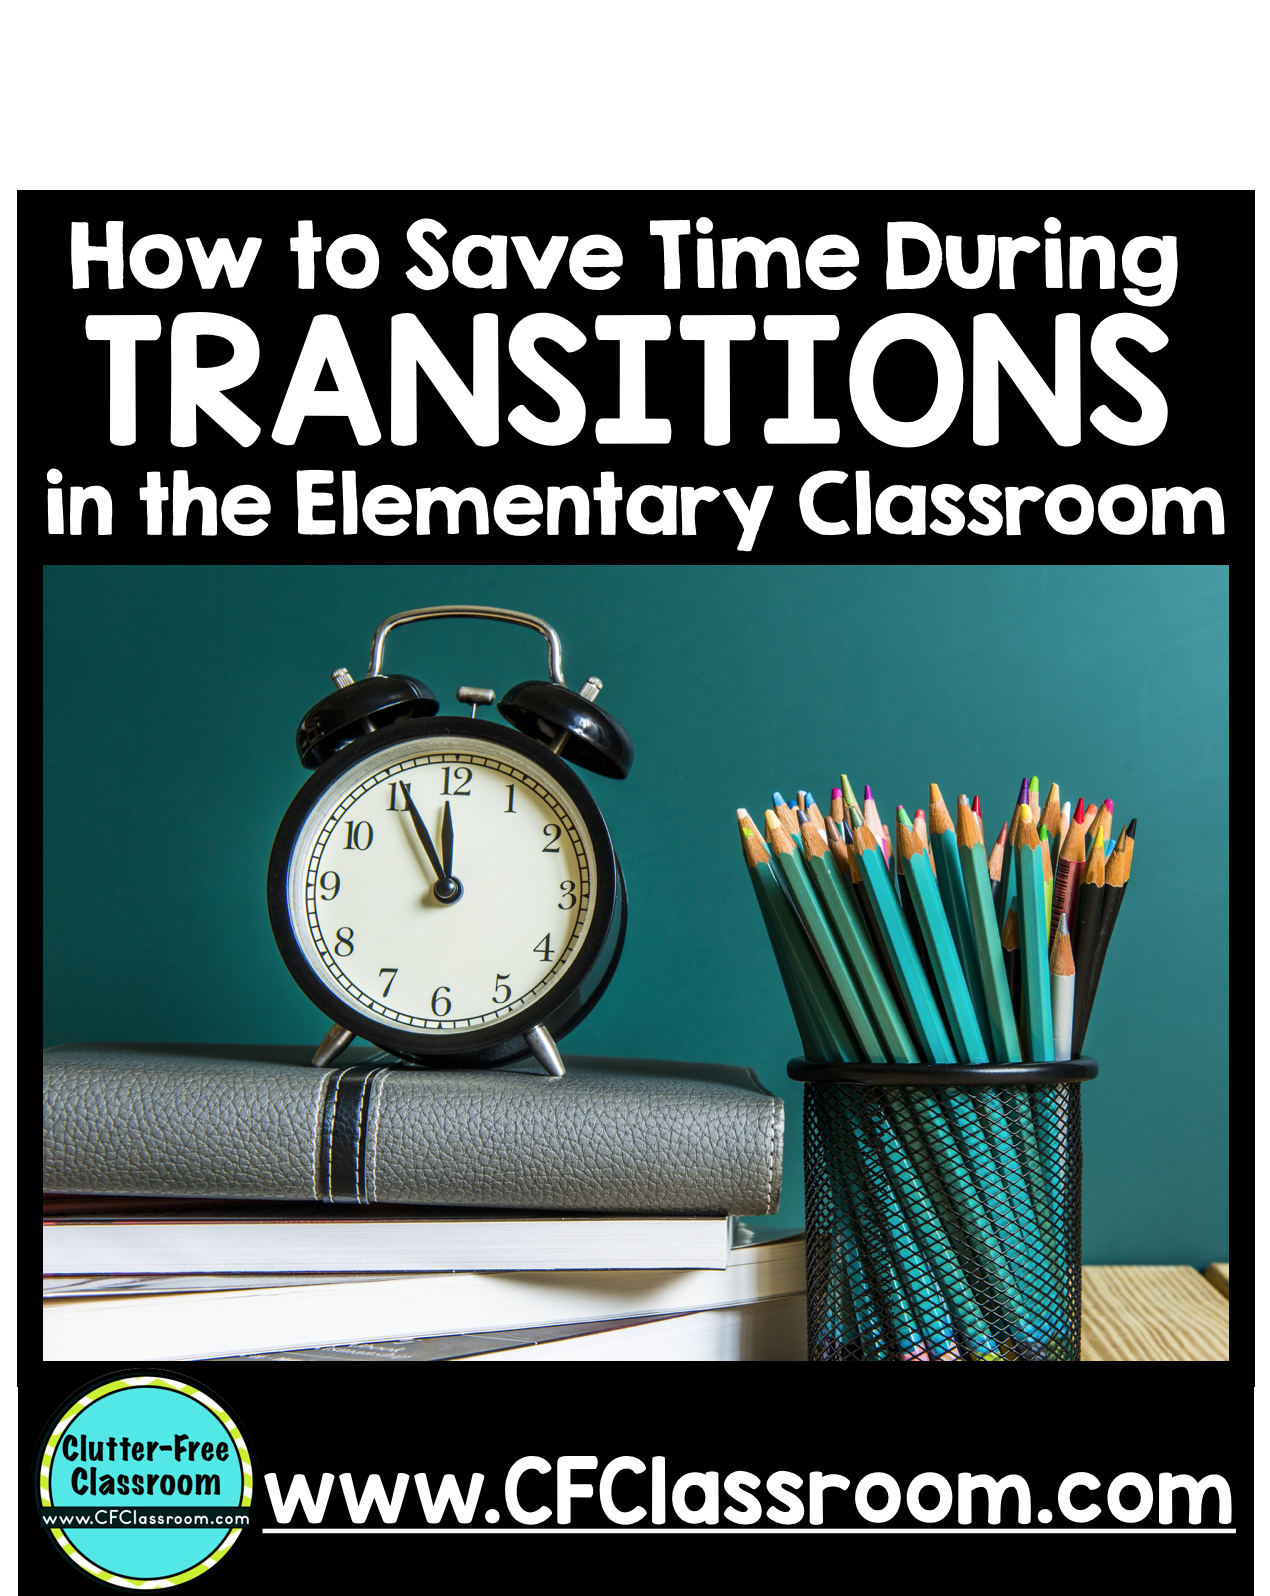 Check out these fun and easy classroom management tips and strategies for quick classroom transitions from the Clutter Free Classroom. Teachers and students will love teaching and learning these songs, procedures, and routines.